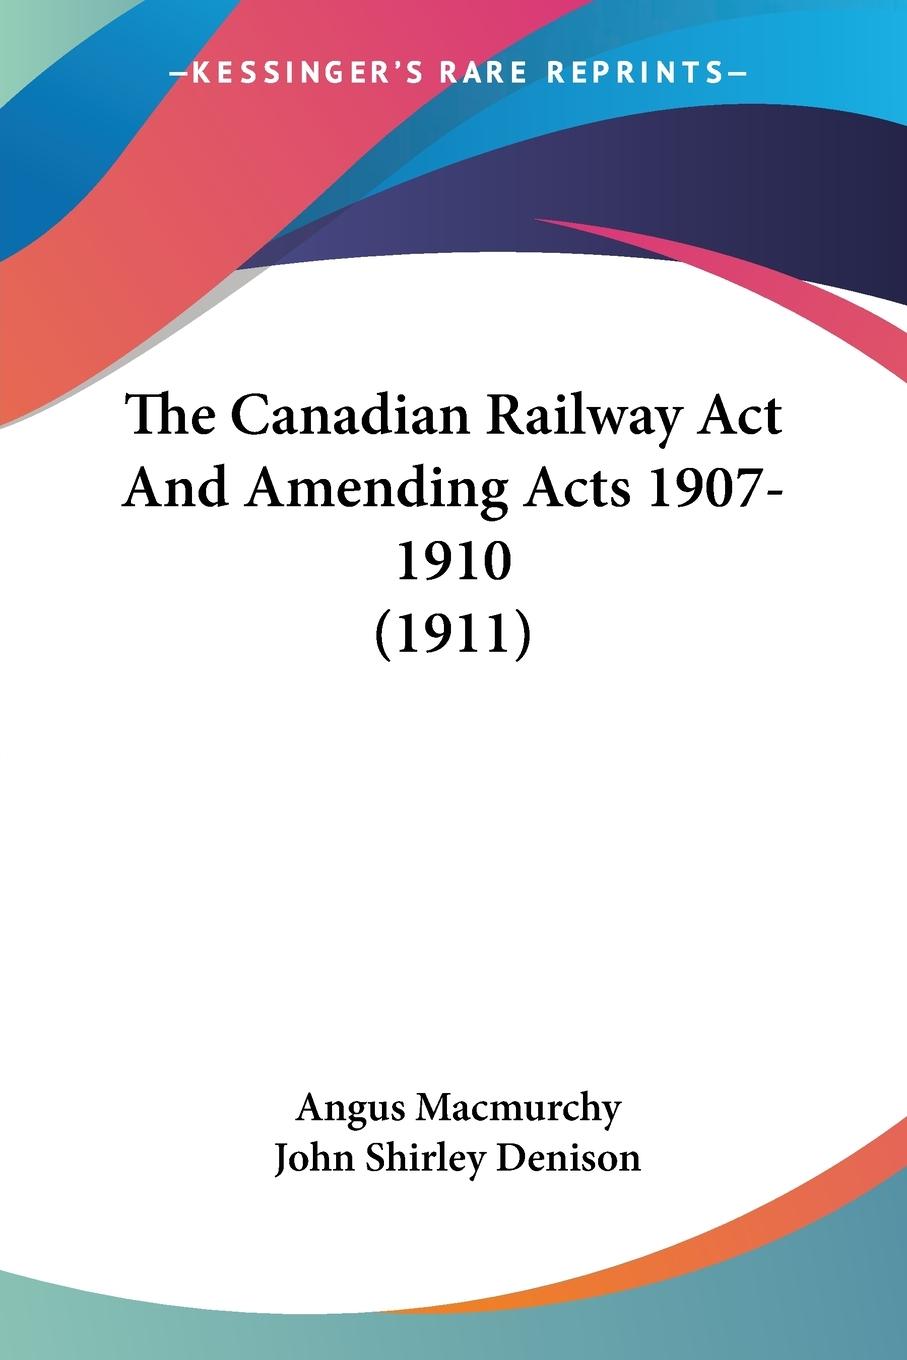 The Canadian Railway Act And Amending Acts 1907-1910 (1911) - Macmurchy, Angus Denison, John Shirley